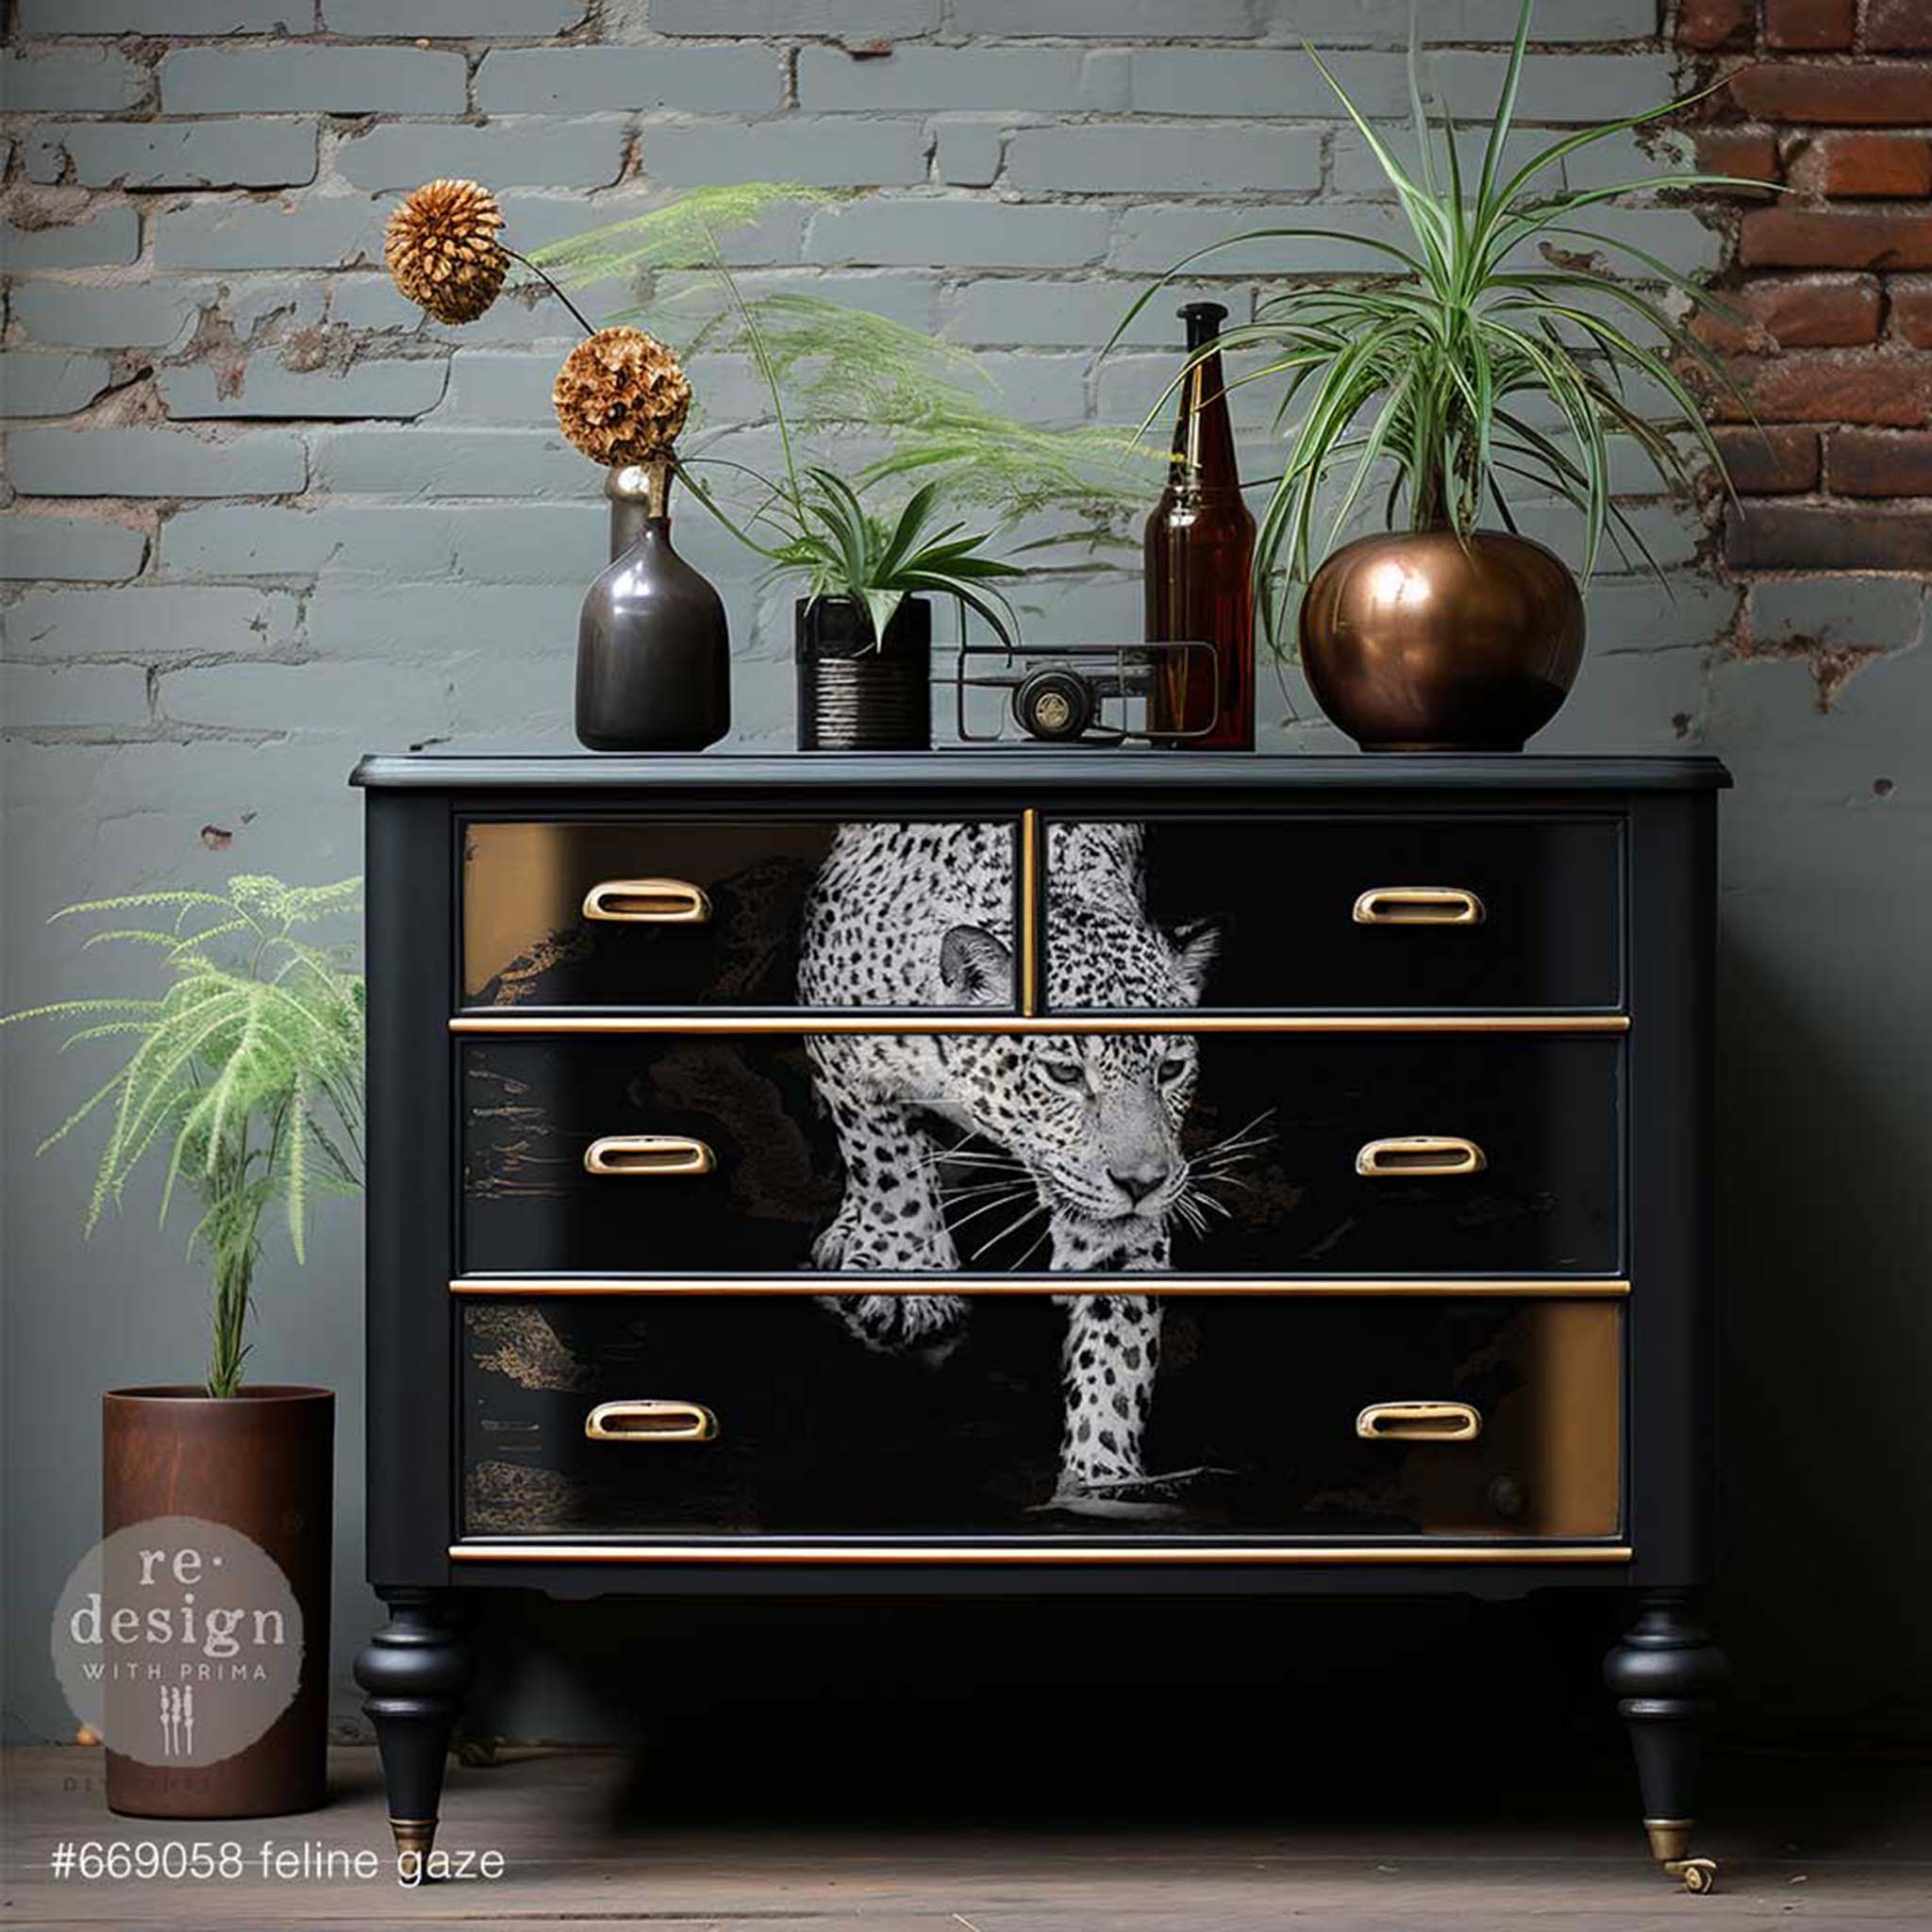 A dresser is painted black with gold accents and features ReDesign with Prima's Feline Gaze A1 fiber paper in the center of its 4 drawers.